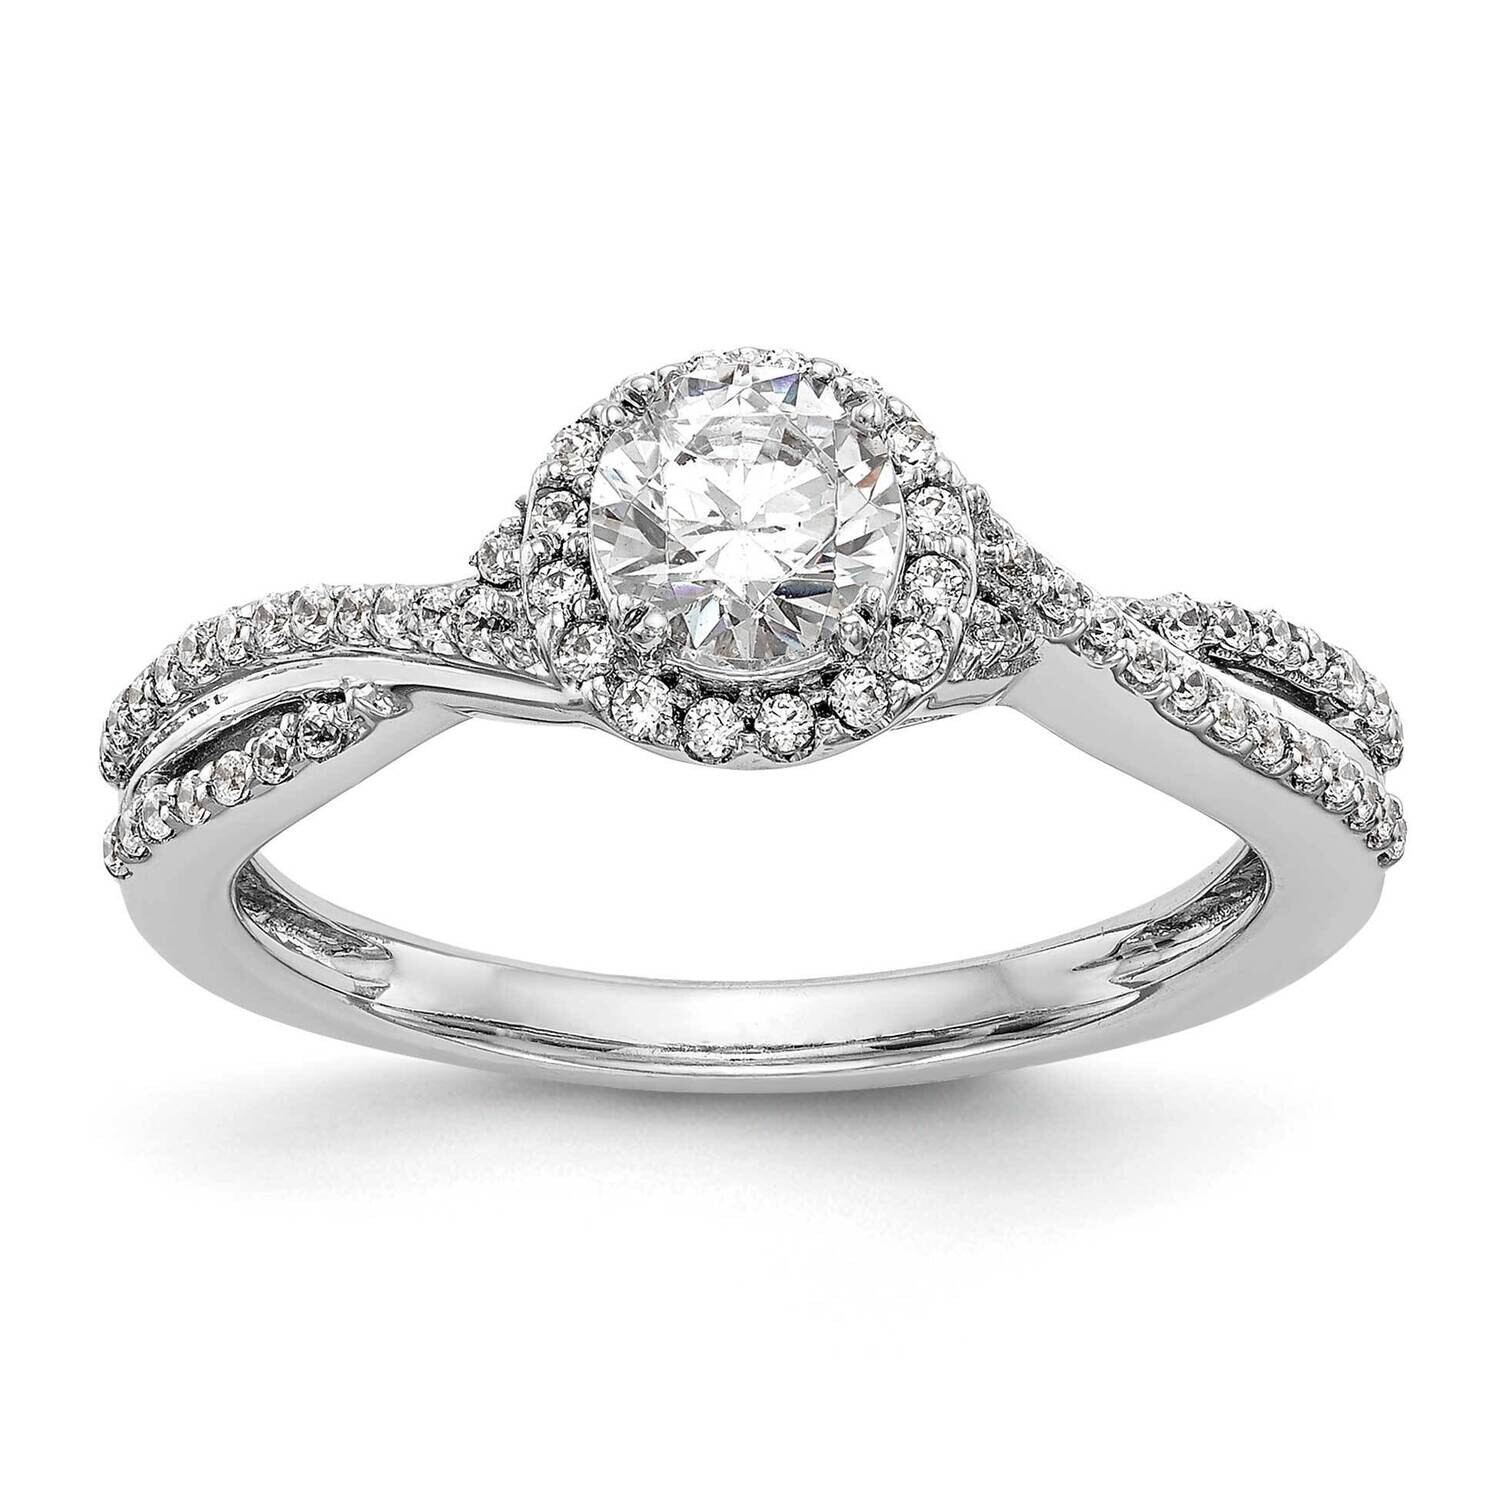 Diamond Complete Halo Engagement Ring 14k White Gold RM2174E-050-WAA